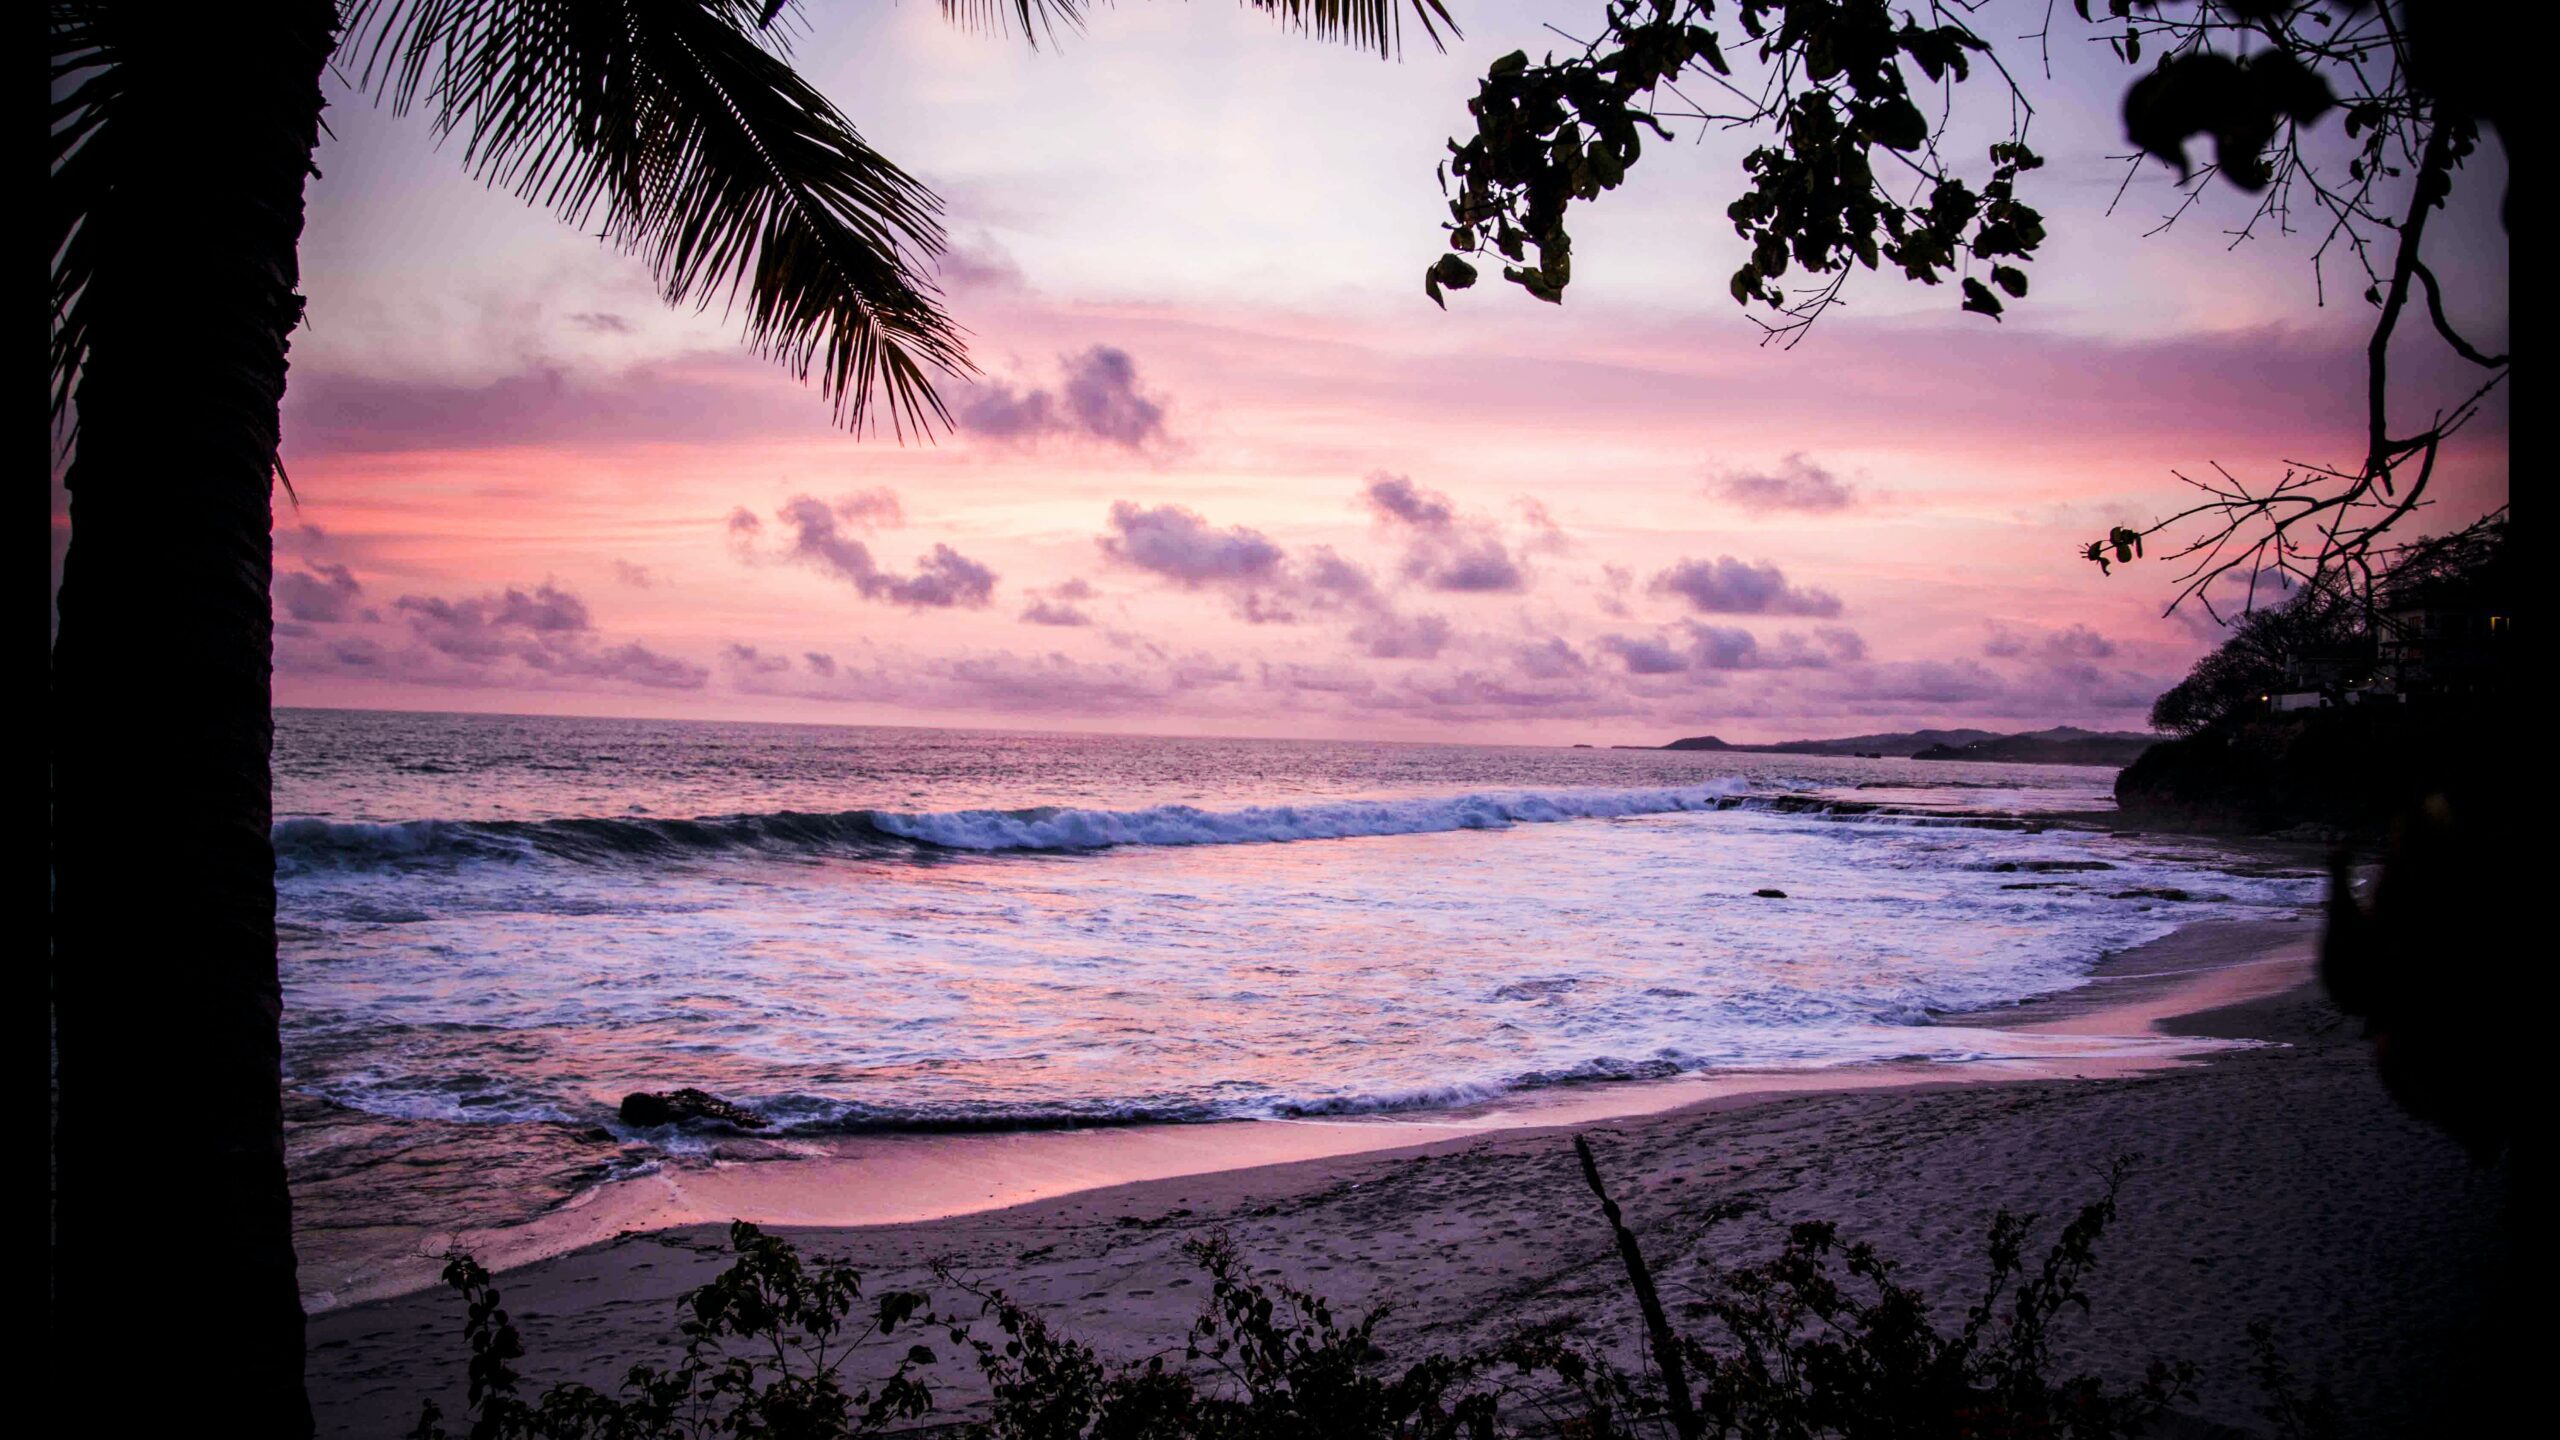 Can I Witness Sunrise Or Sunset Views At Specific Beaches In Nicaragua?